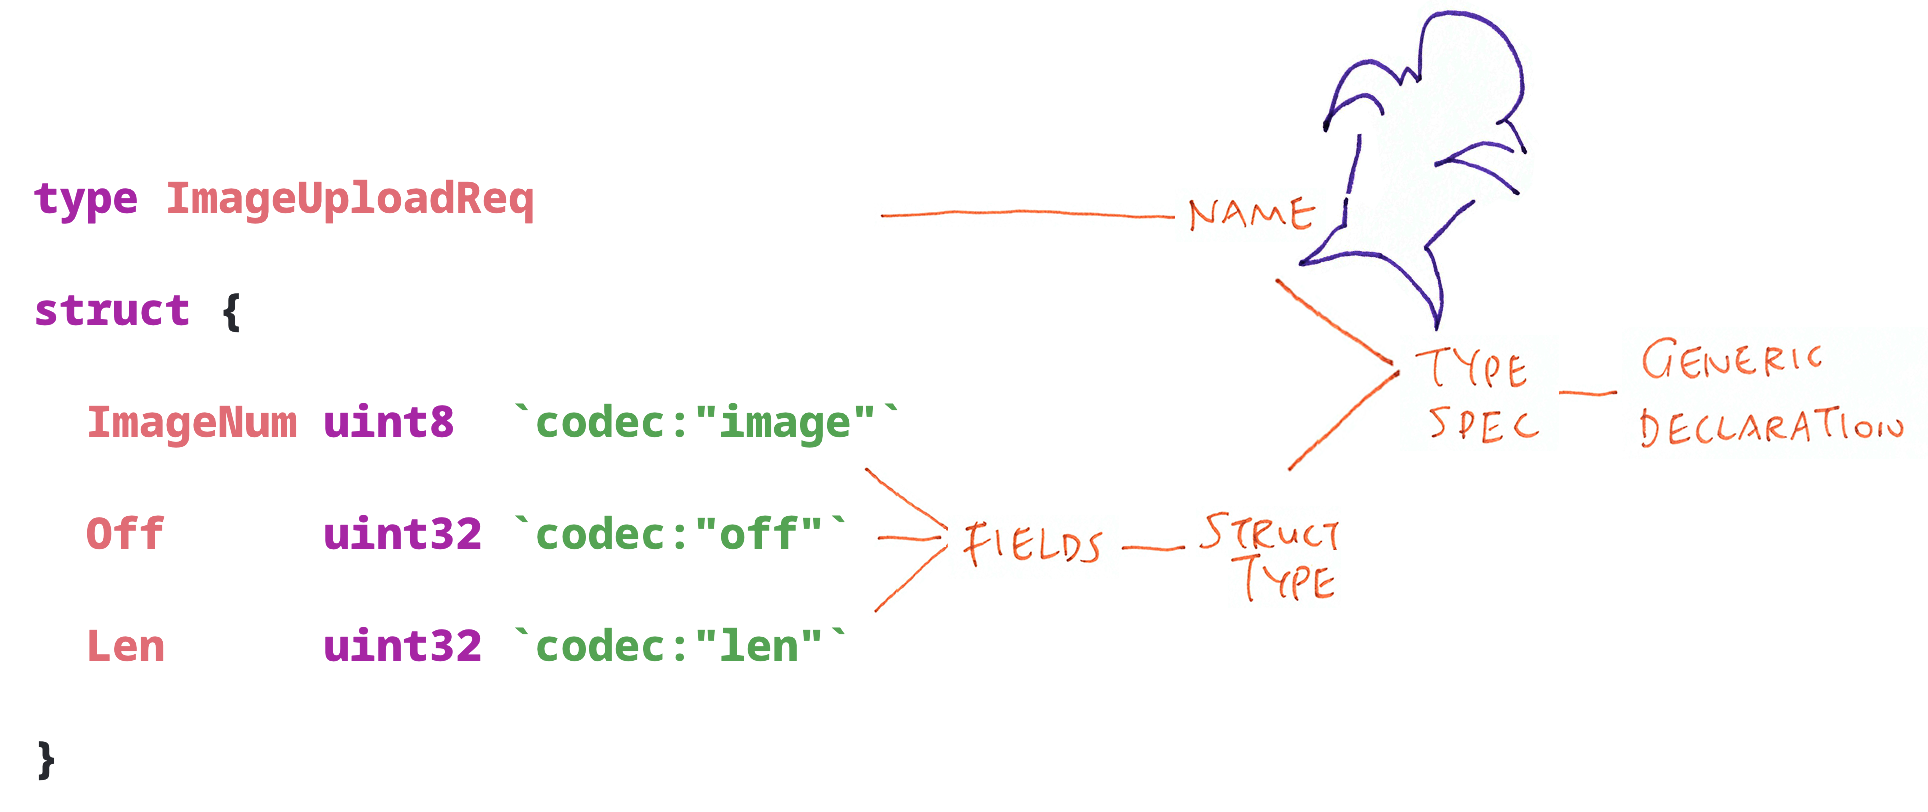 Walking the Abstract Syntax Tree